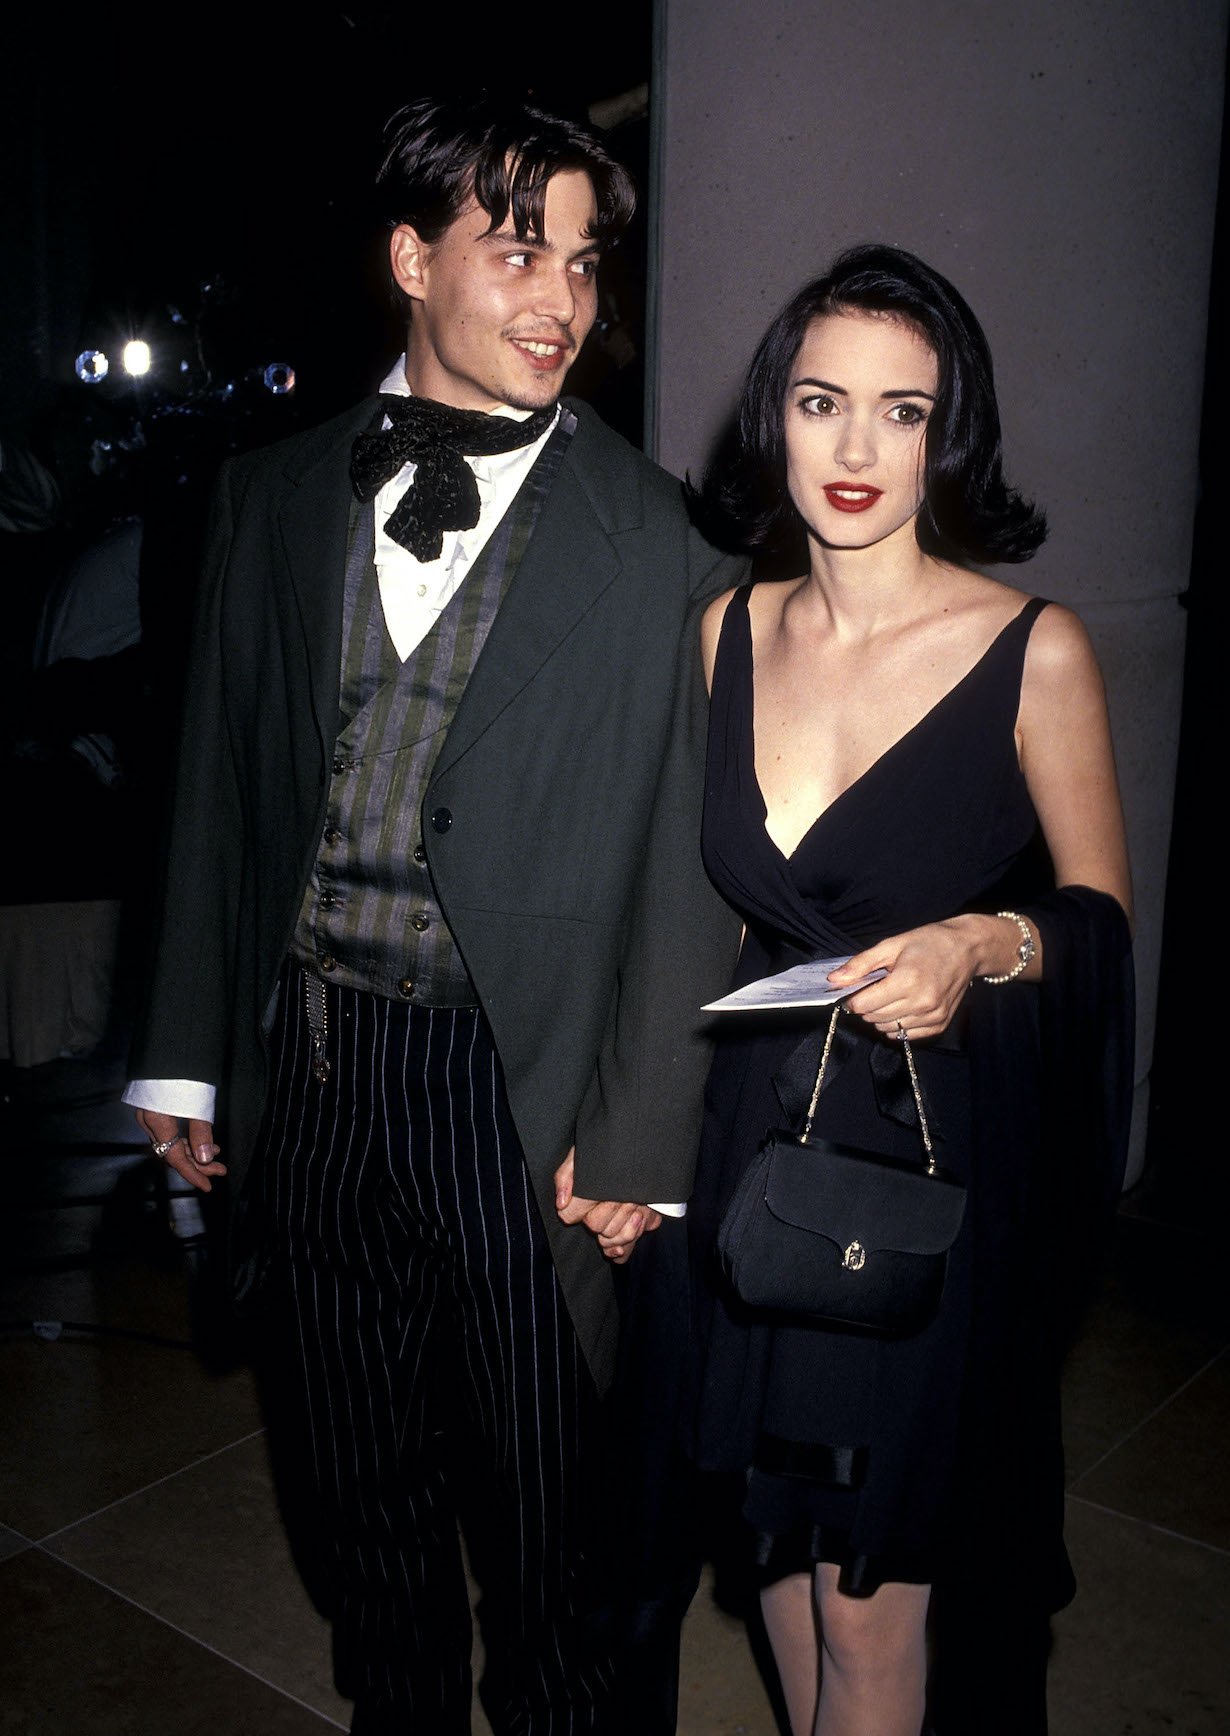 Johnny Depp and Winona Ryder attend the 48th Annual Golden Globe Awards on January 19, 1991